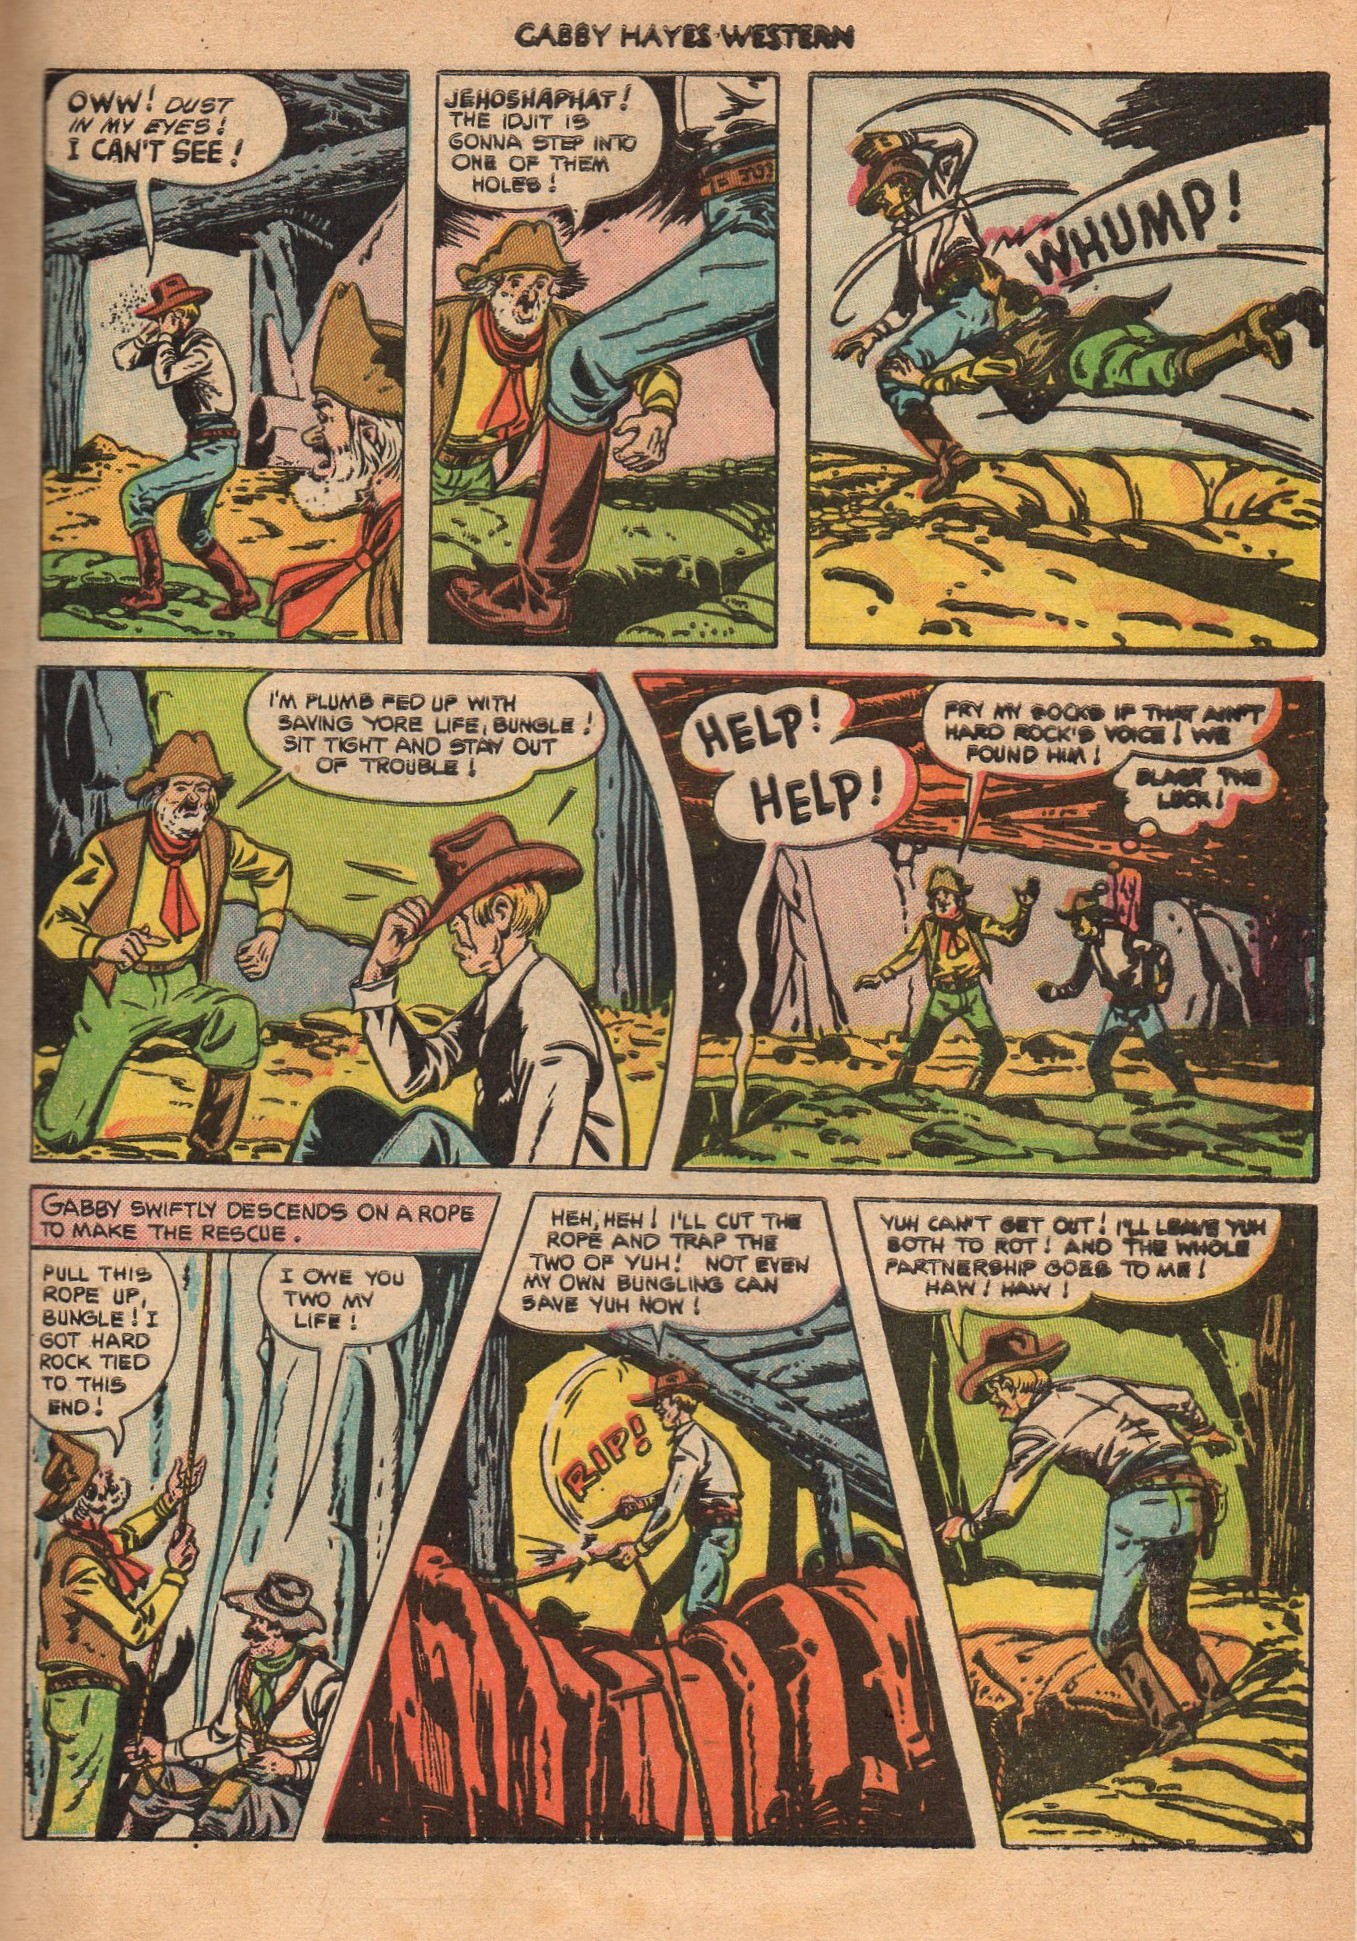 Read online Gabby Hayes Western comic -  Issue #46 - 33